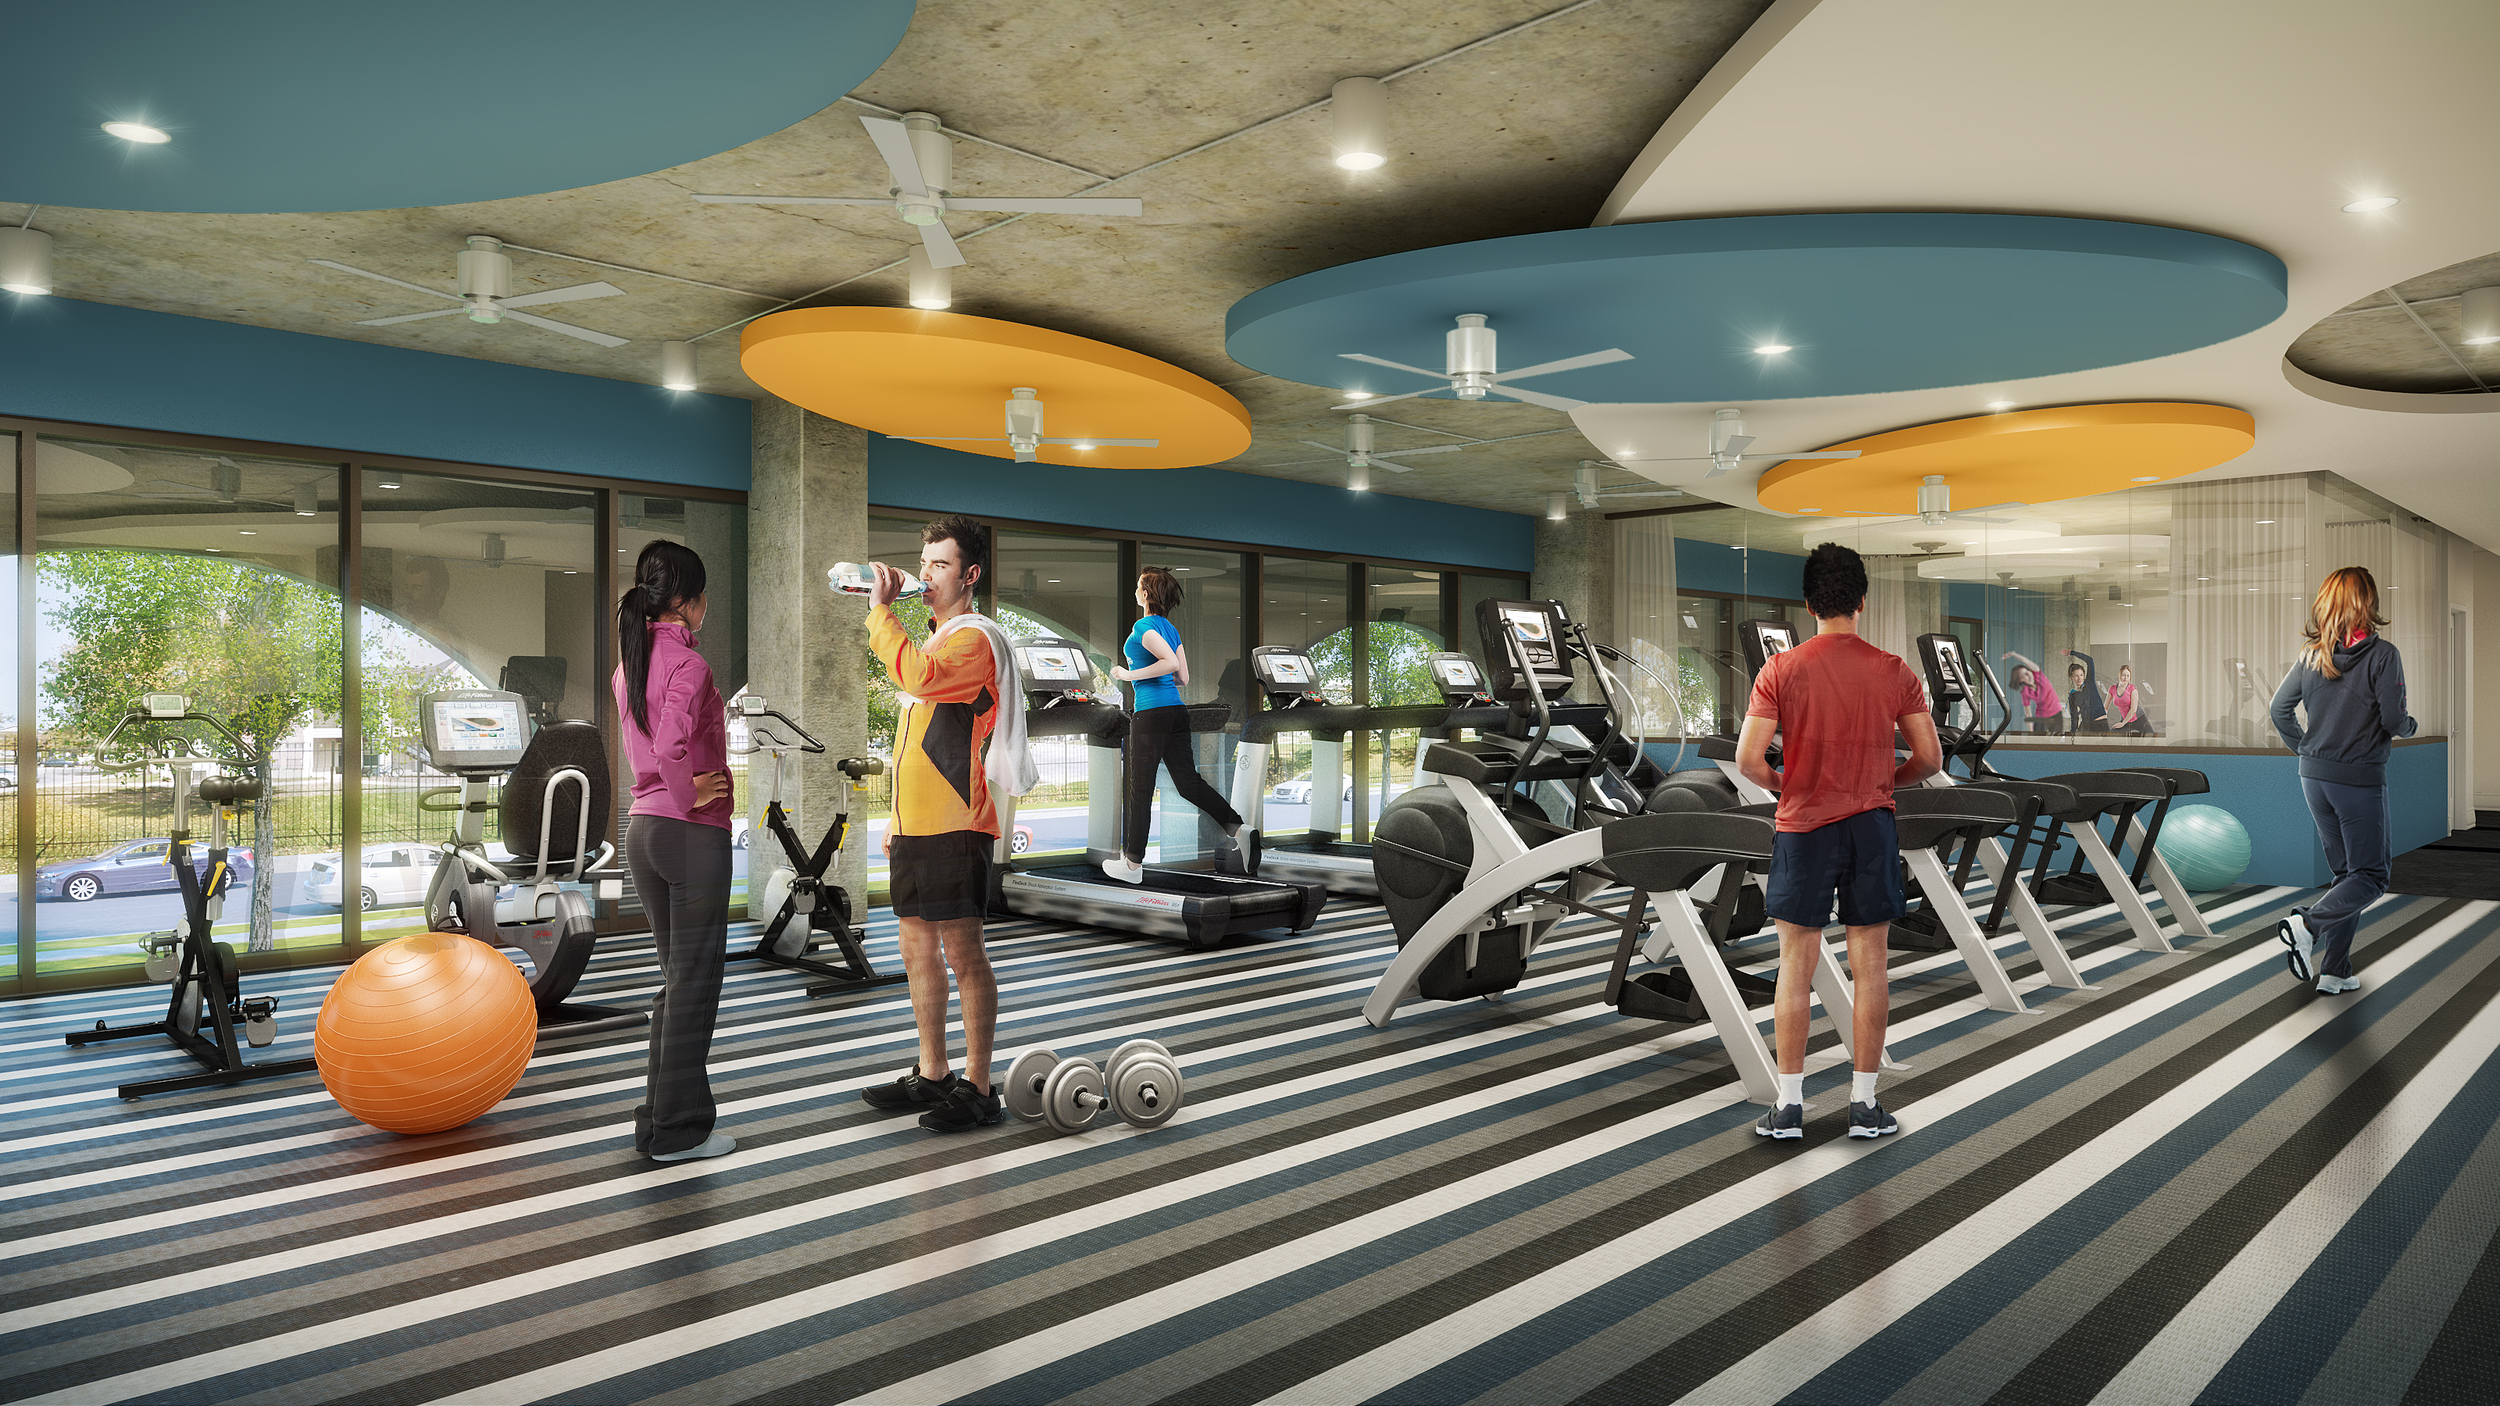  FITNESS CENTER  rendering by cagleart.com 